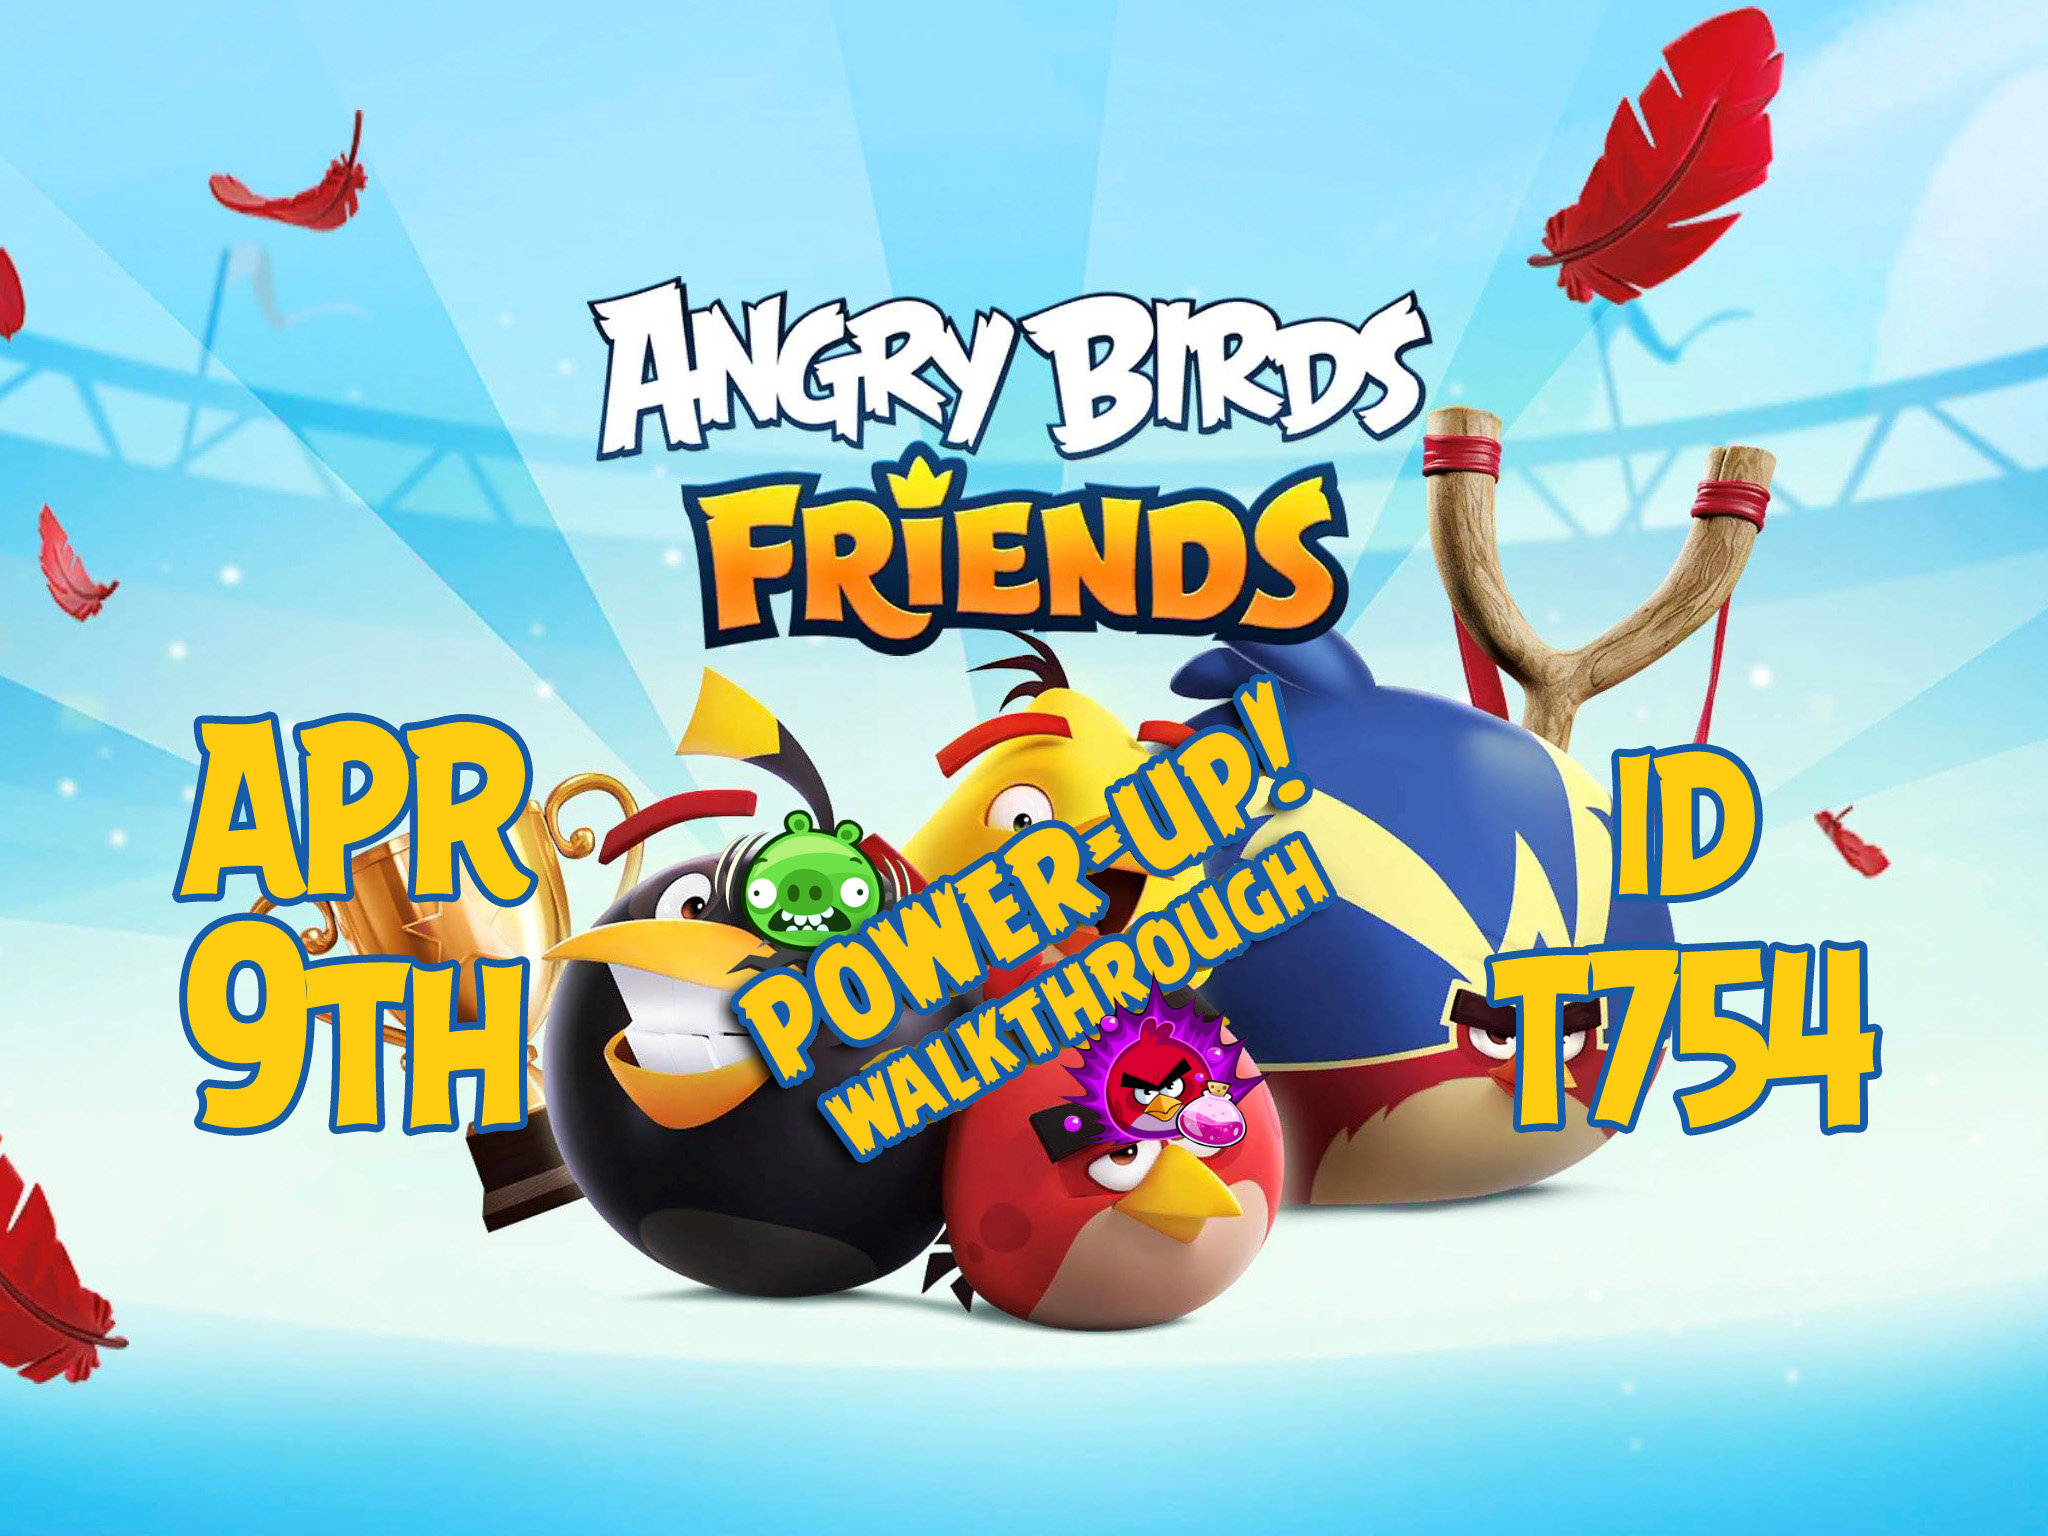 Angry-Birds-Friends-Tournament-T753-Feature-Image-PU